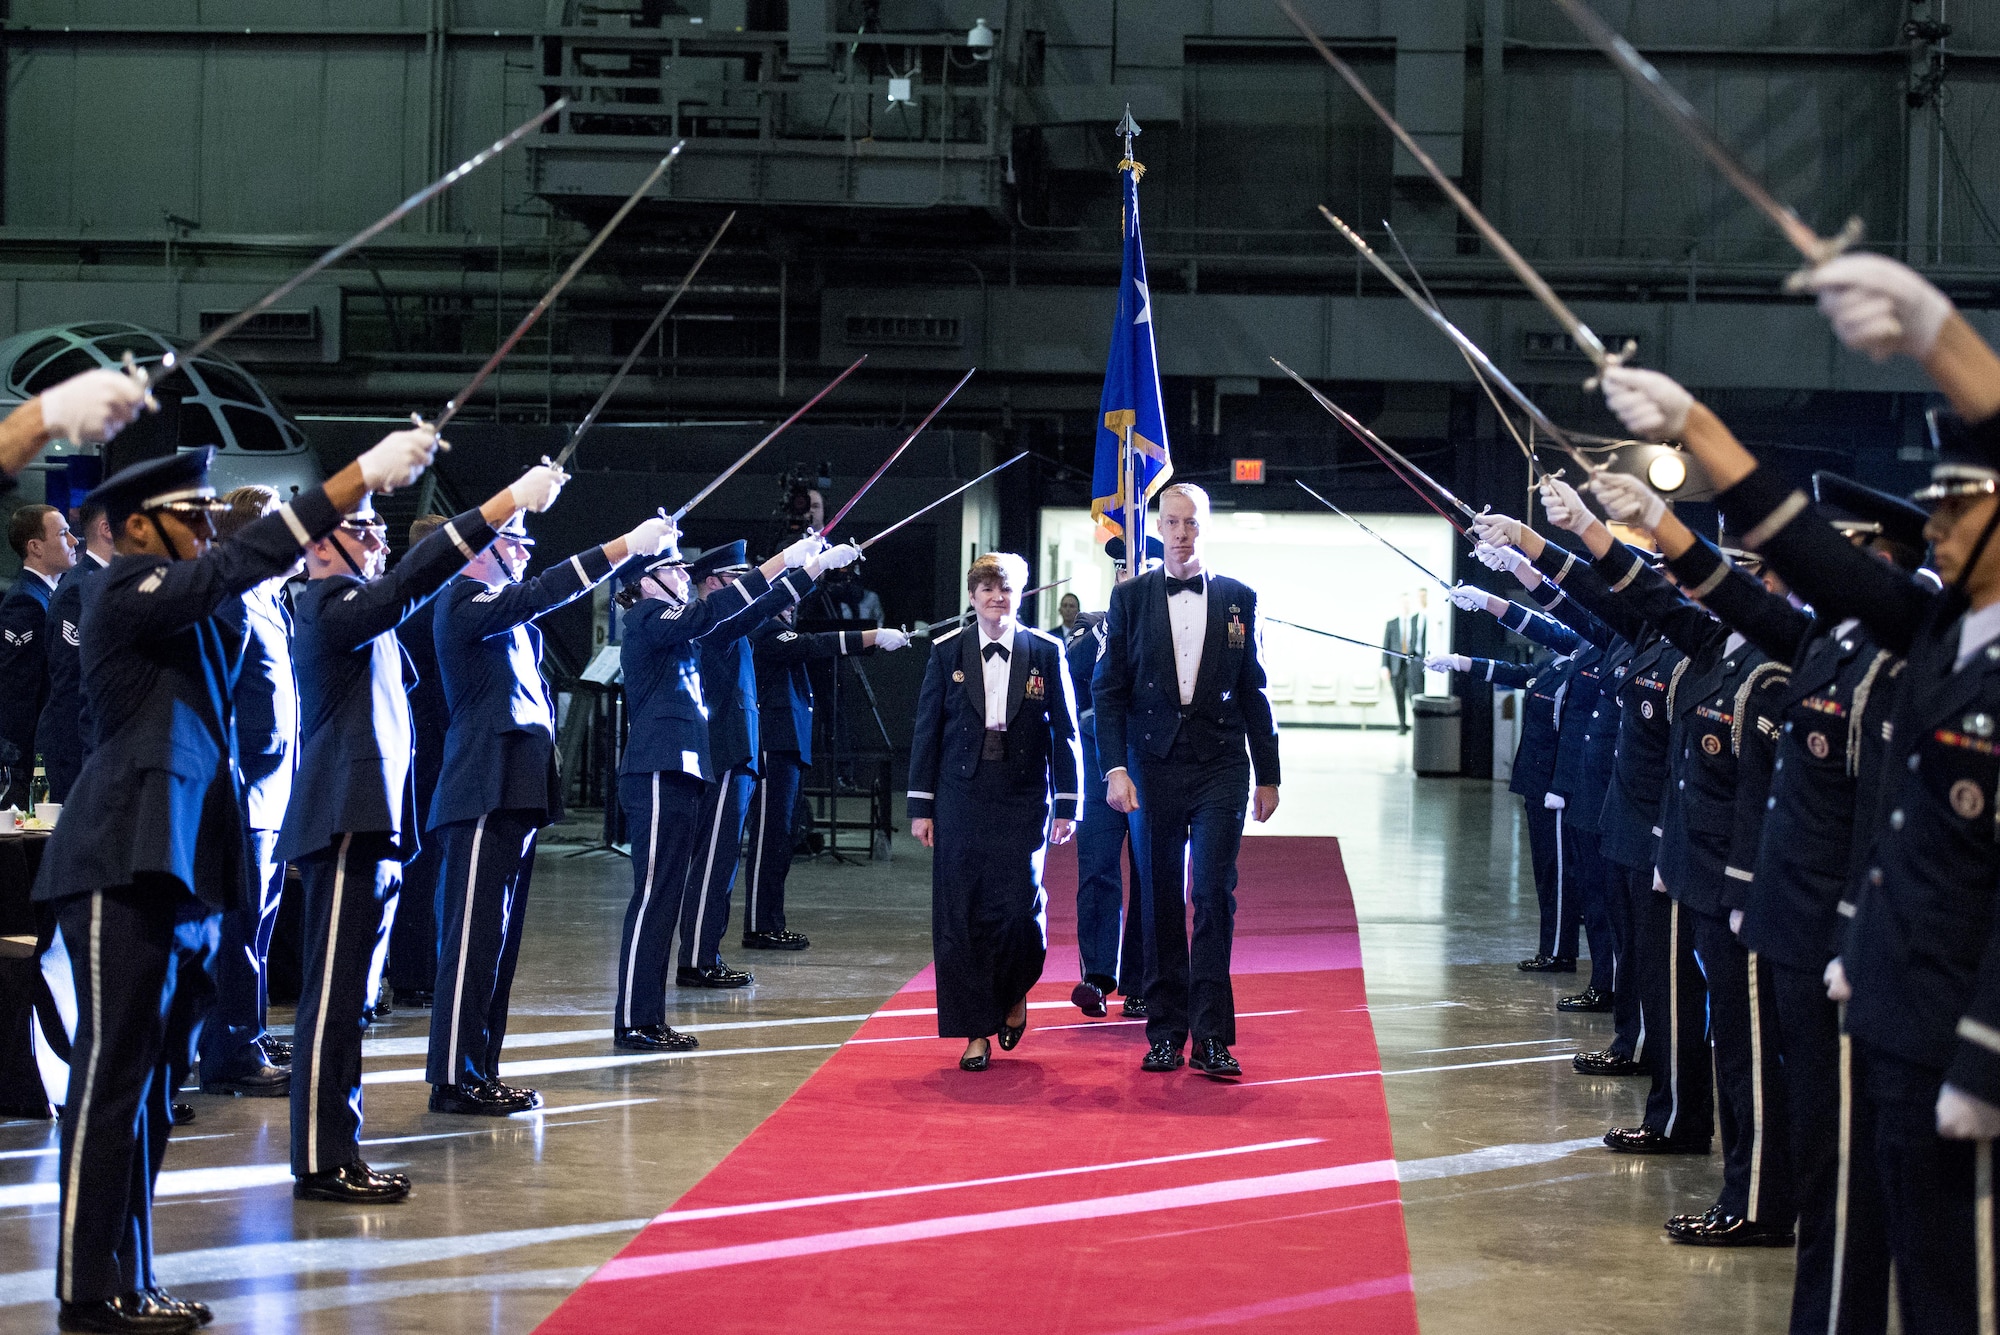 Gen. Janet Wolfenbarger is joined by Chief Master Sgt. Michael Warner as she enters her Order of the Sword induction ceremony through a formation of sabers raised by an Honor Guard Feb. 5, 2015, at the National Museum of the U.S. Air Force in Ohio. The ceremony was steeped in medieval symbolism and military tradition, and paid tribute to the general's servant leadership. The Order of the Sword is the highest honor Air Force NCOs can bestow upon an individual who has made significant contributions to the enlisted force. Wolfenbarger is the Air Force Materiel Command commander and Warner is the AFMC command chief. (U.S. Air Force photo/Wesley Farnsworth)